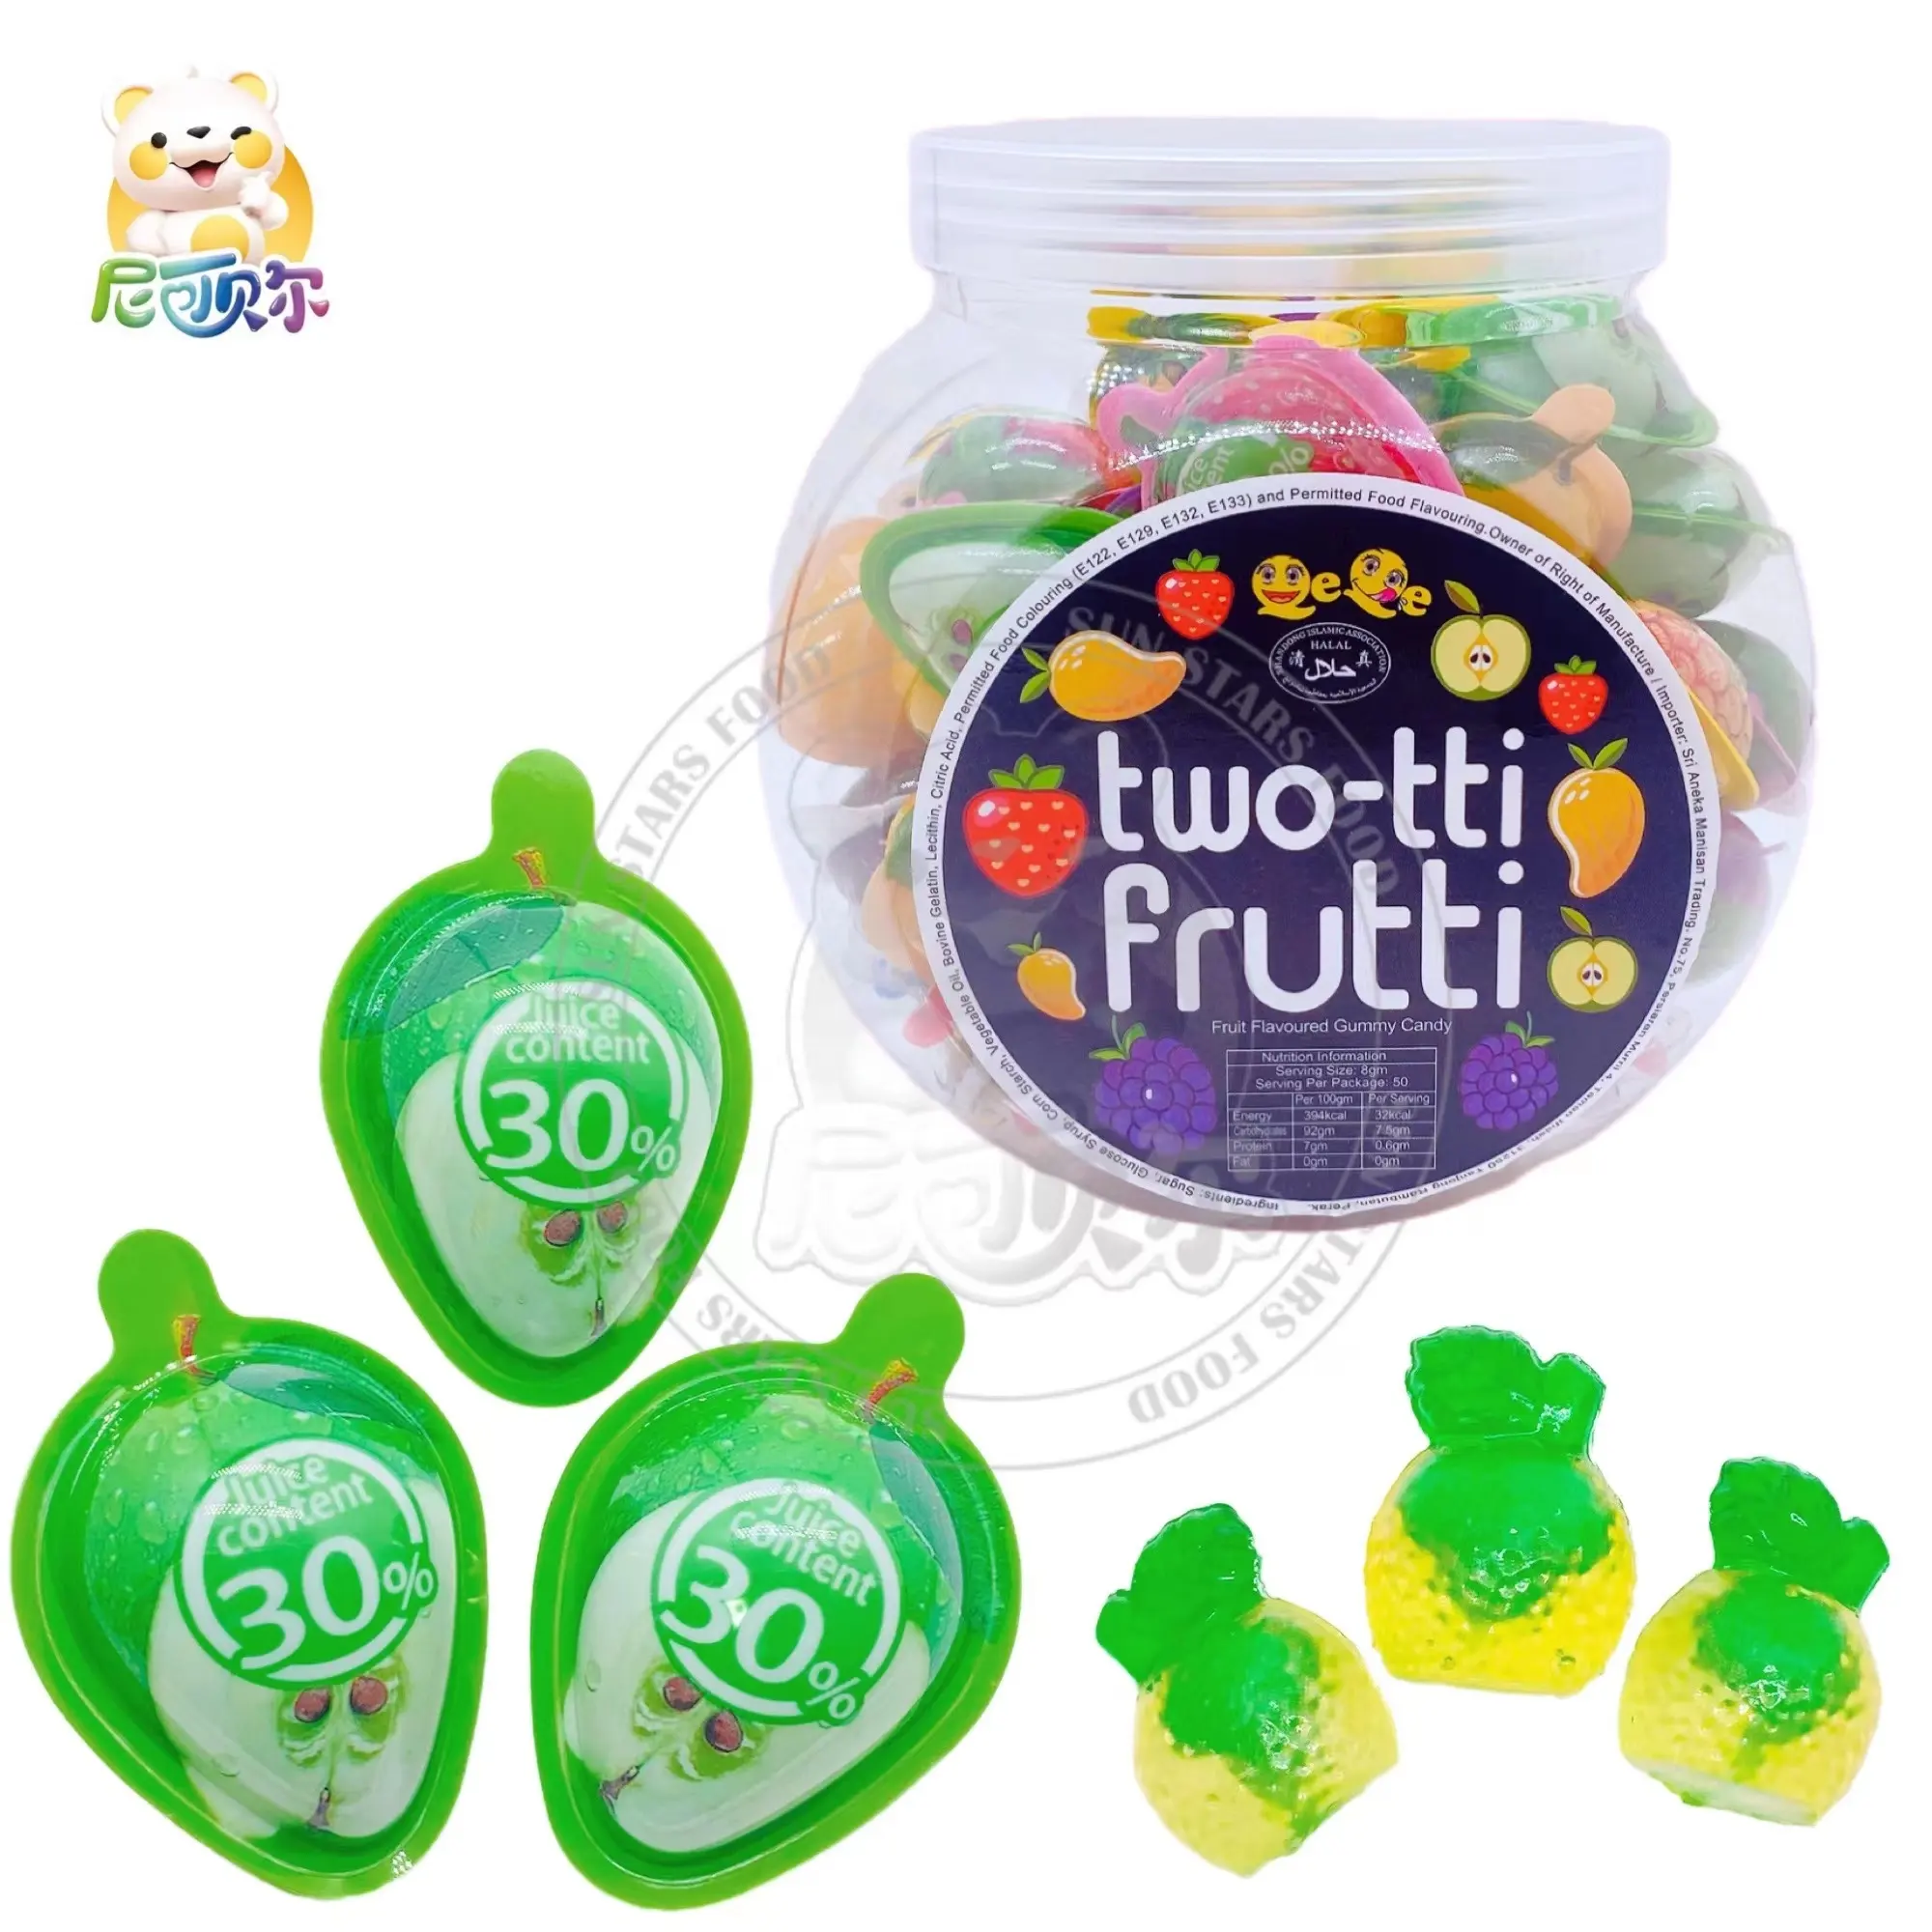 China Wholesale New Fruit Fun Candy 3d Stereoscopic Green Apple Shape Gummy Candy